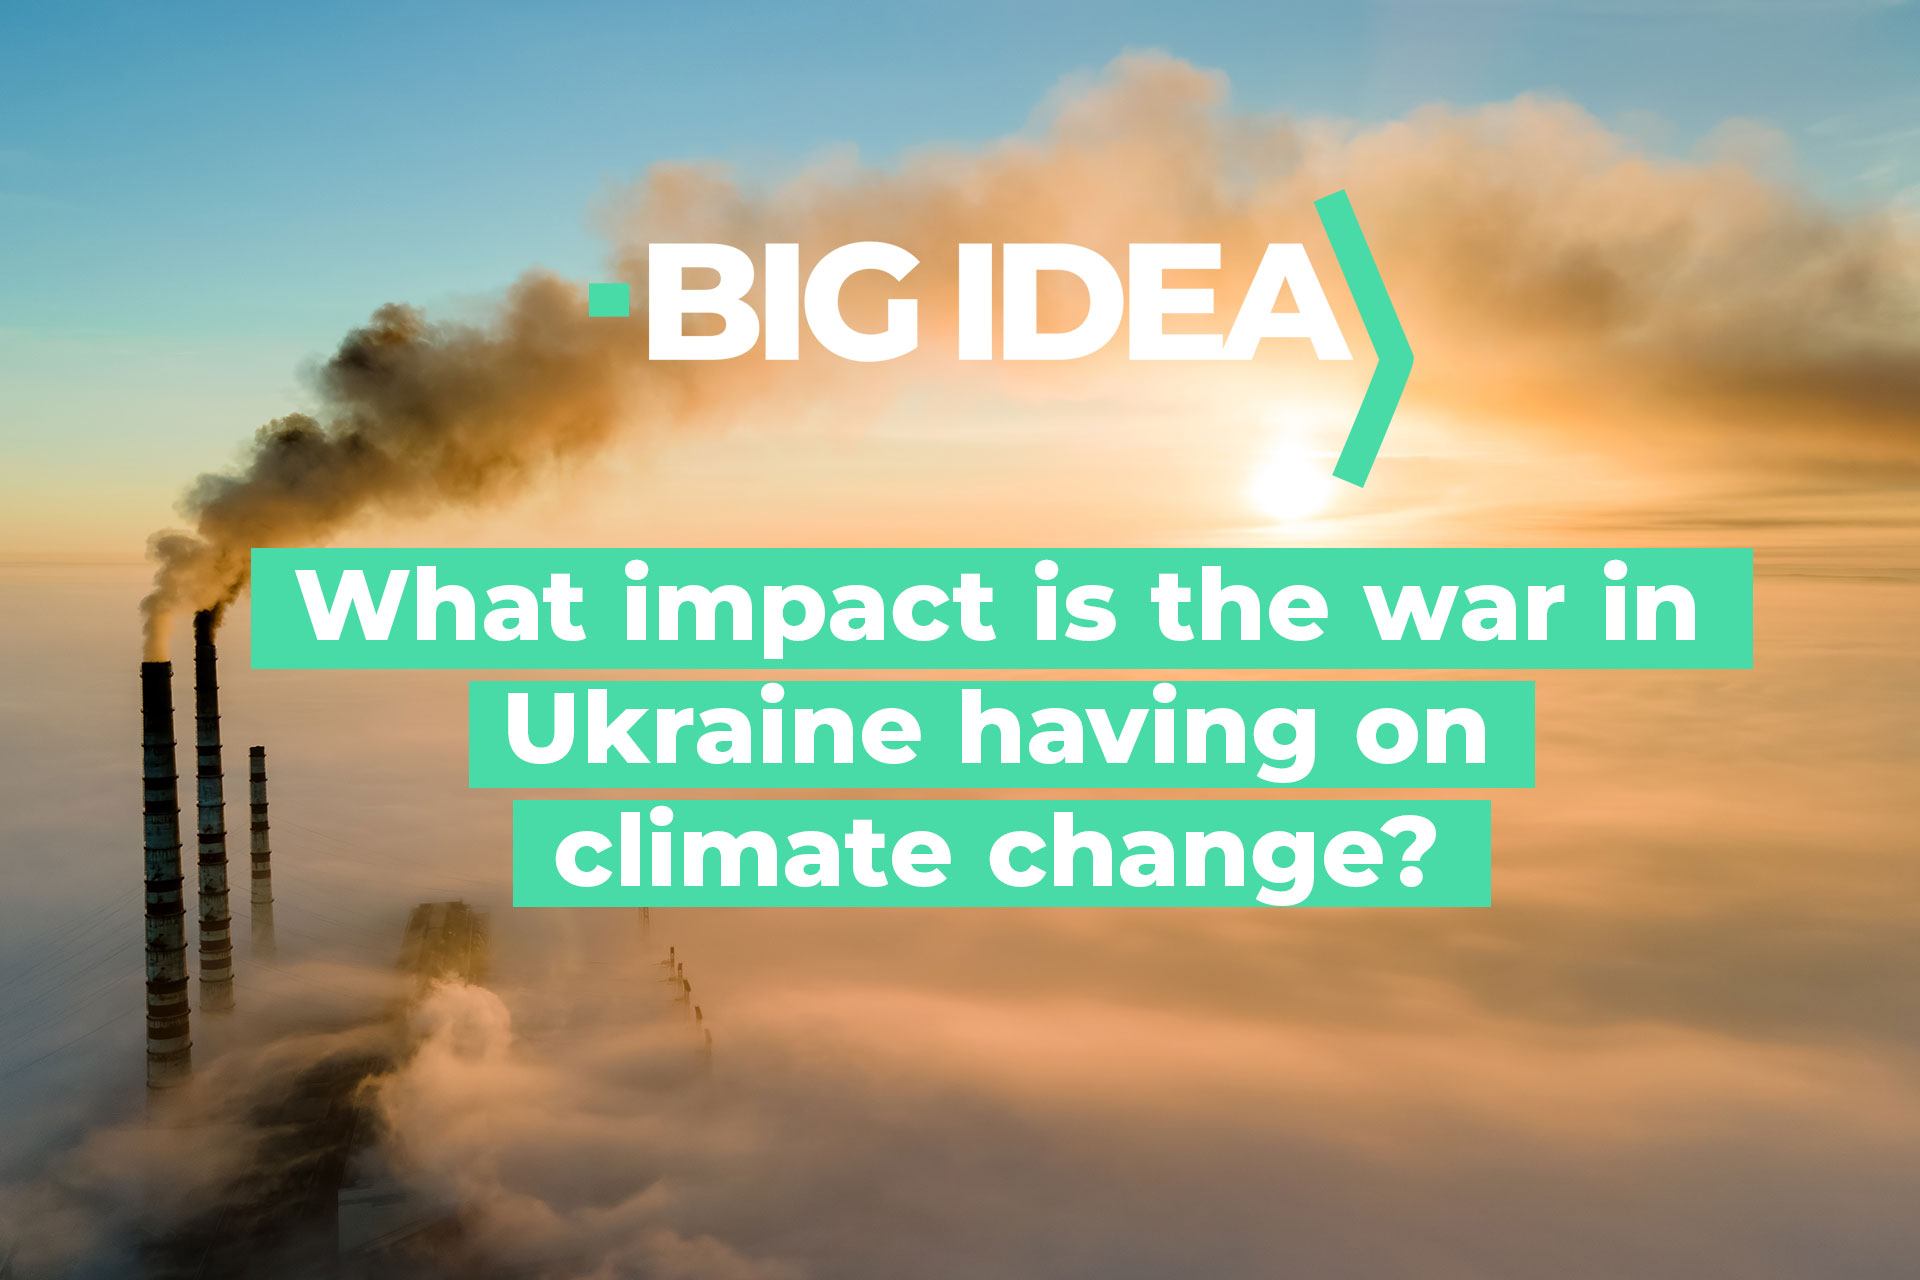 What impact is the war in Ukraine having on climate change?